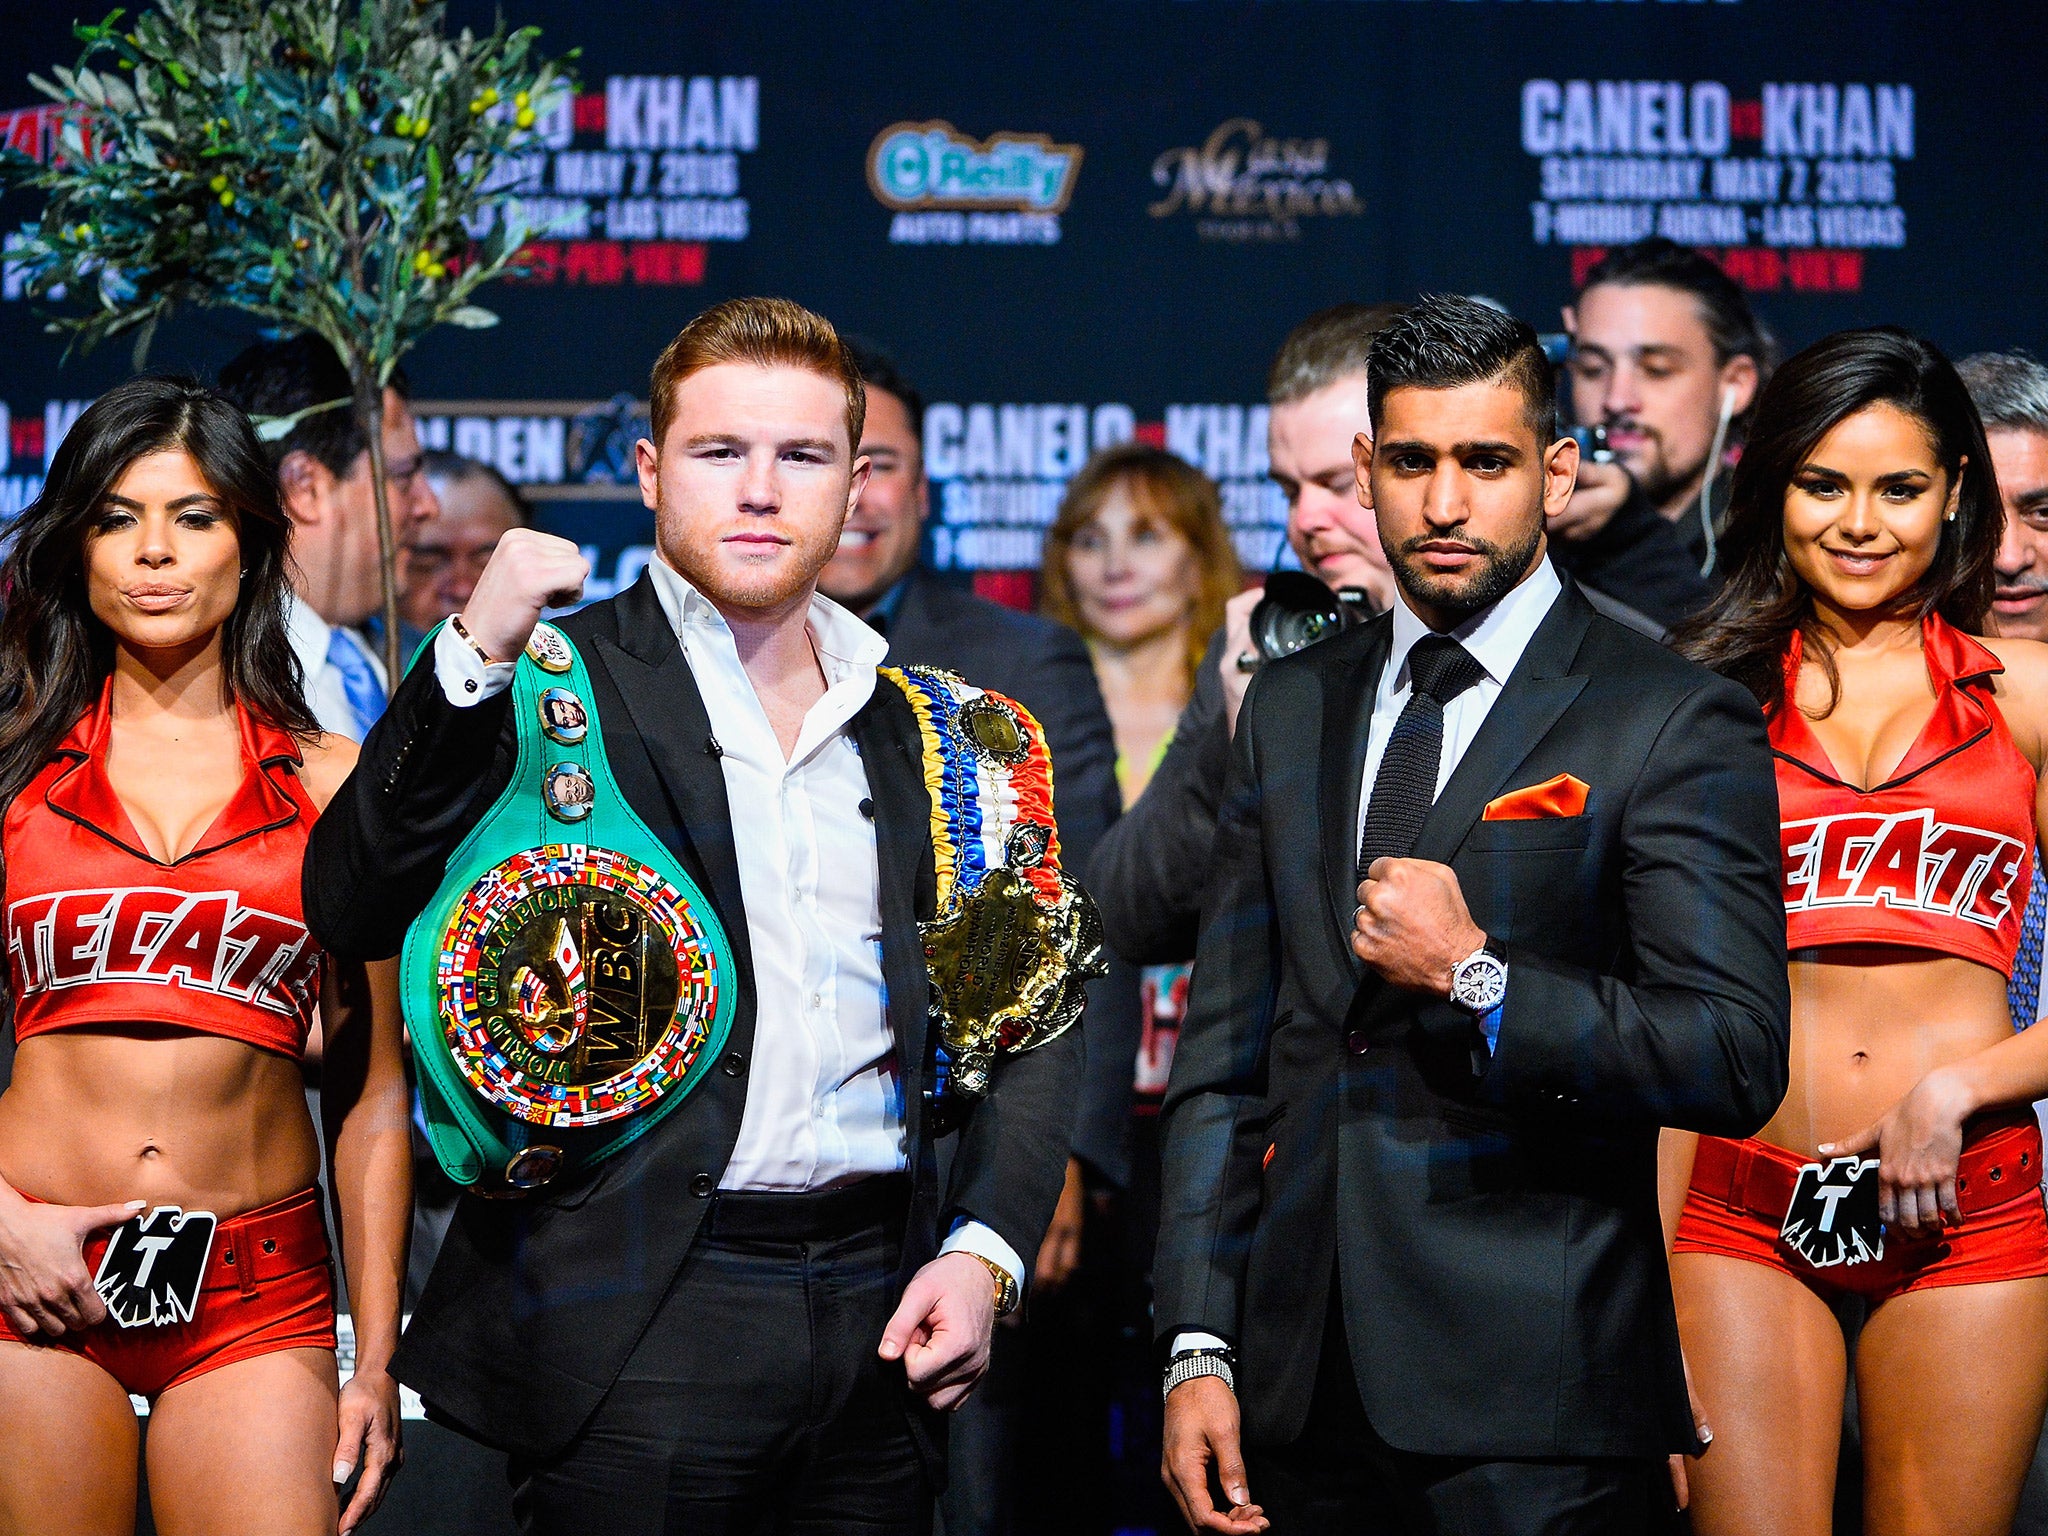 Saul 'Canelo' Alvarez and Amir Khan fight in Las Vegas on 7 May